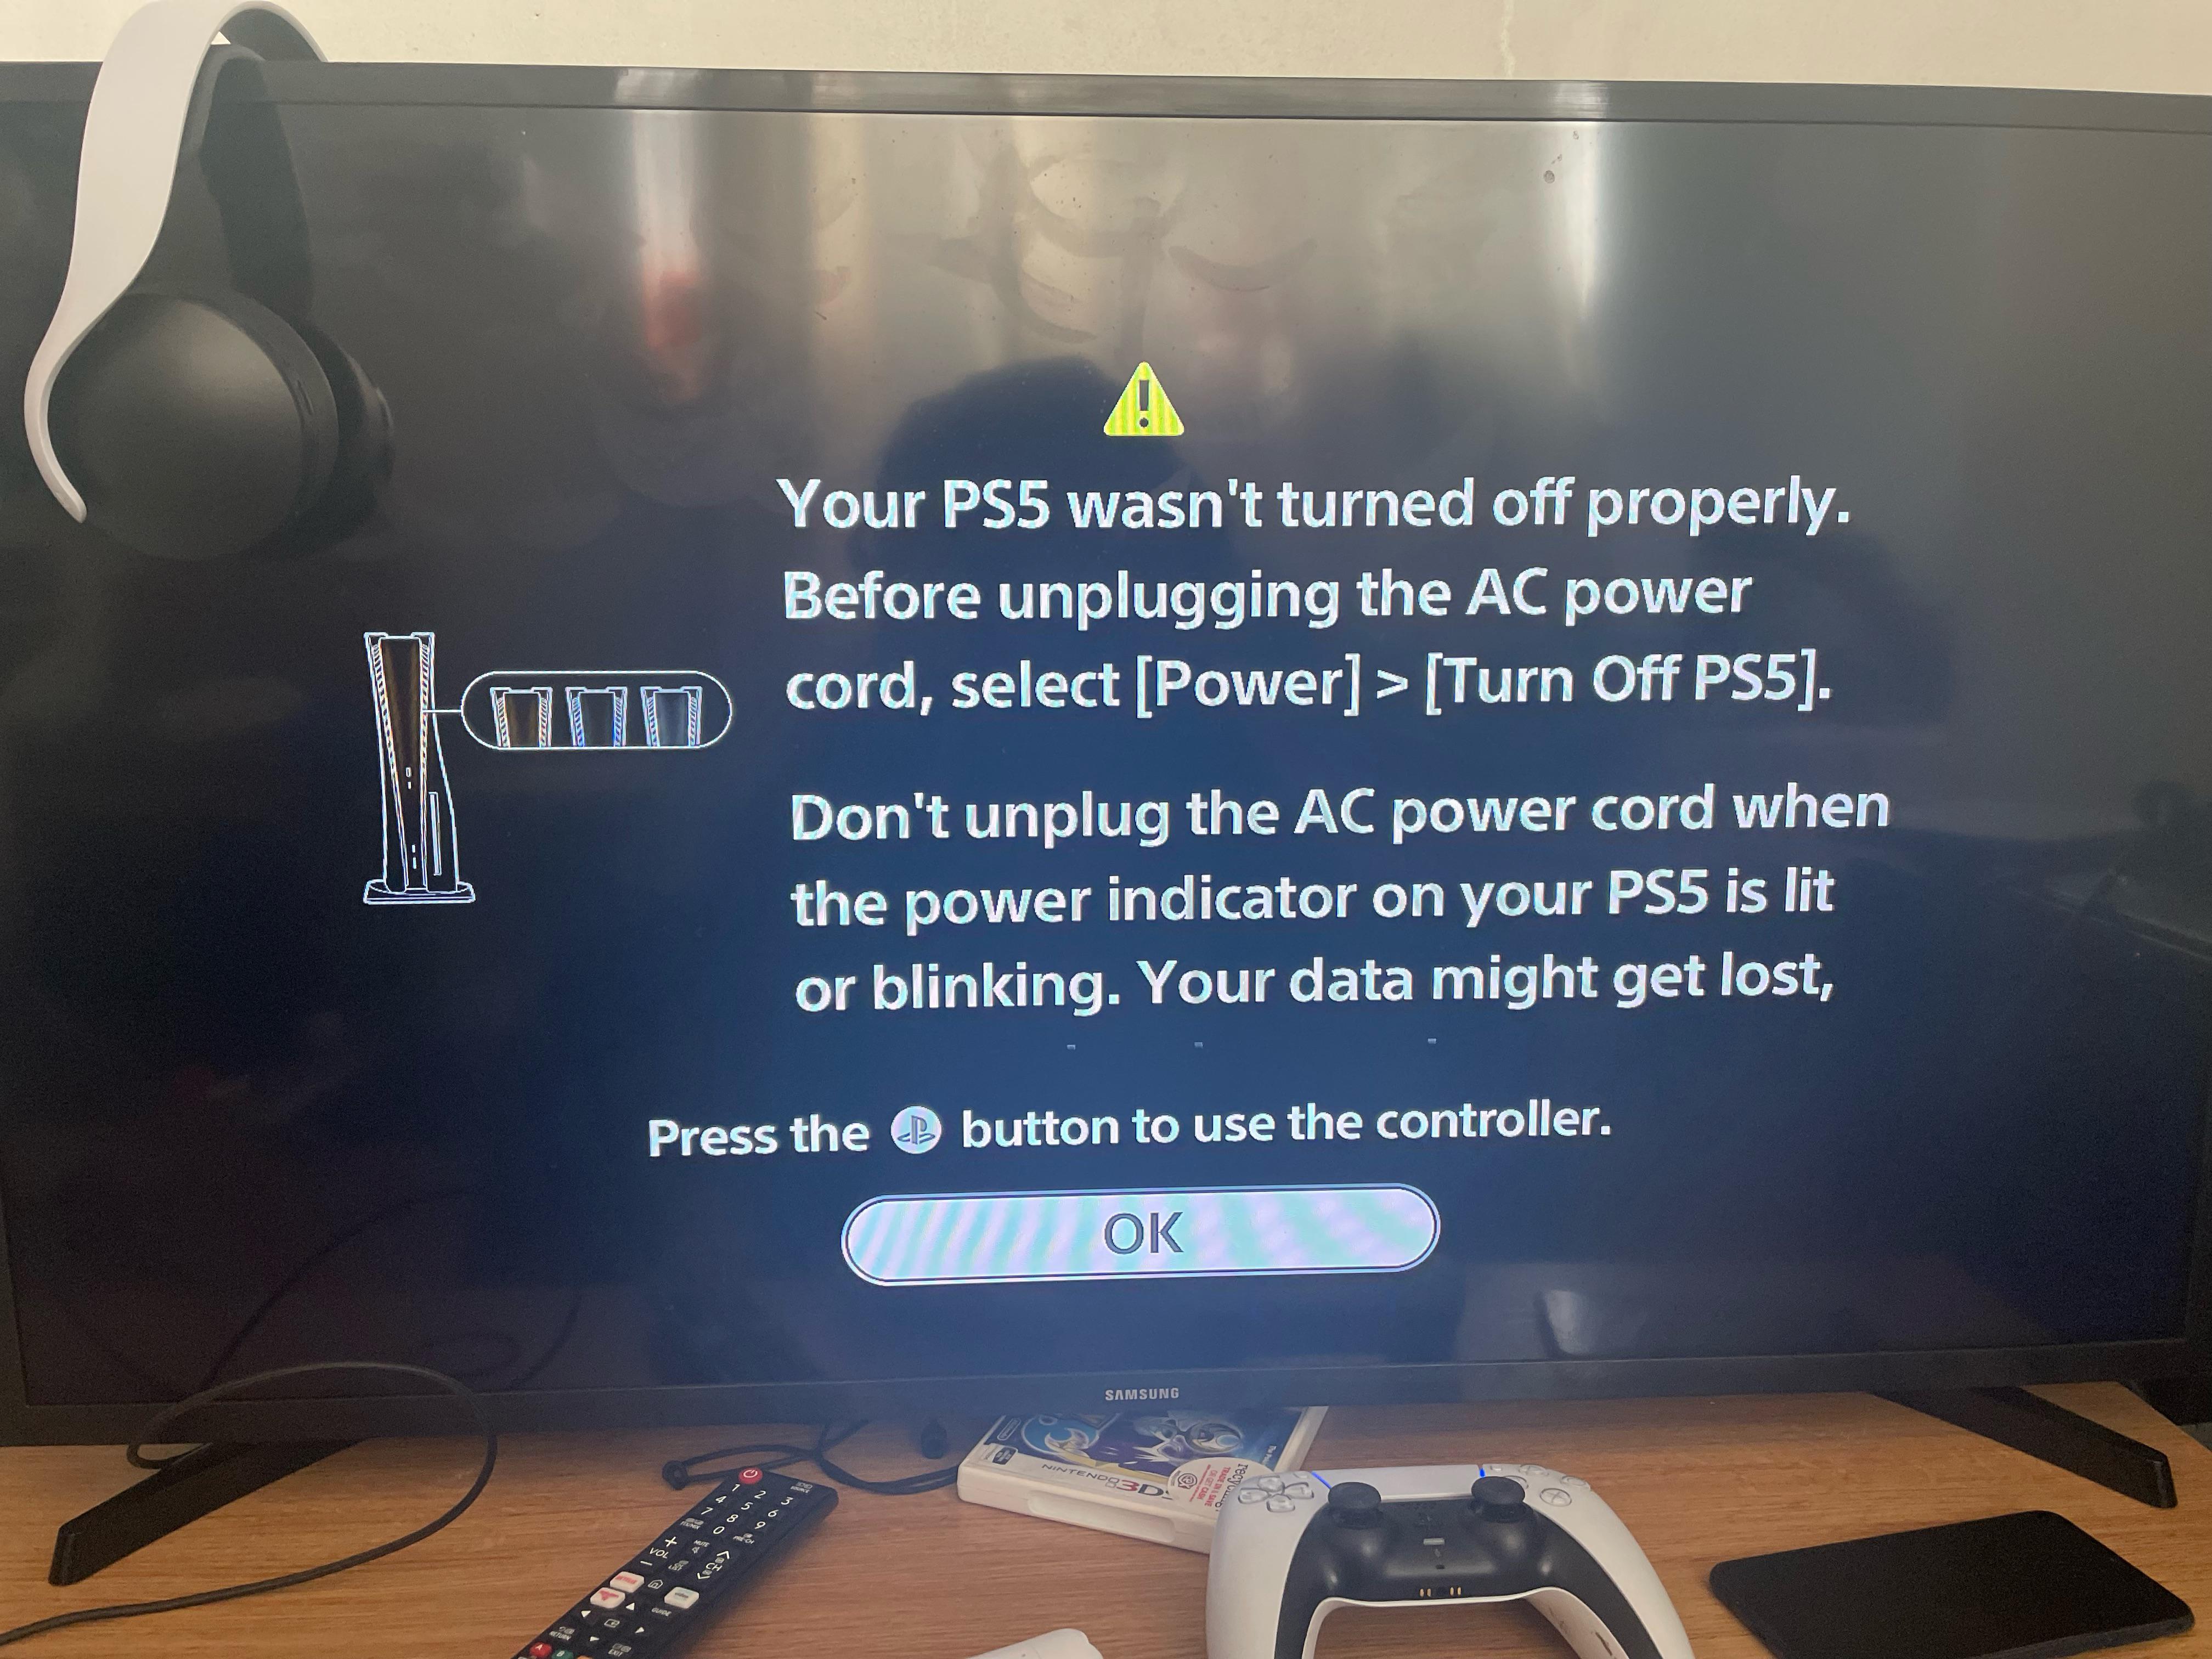 Turn off your PlayStation console and unplug it from the power source.
Wait for a few minutes and then plug it back in.